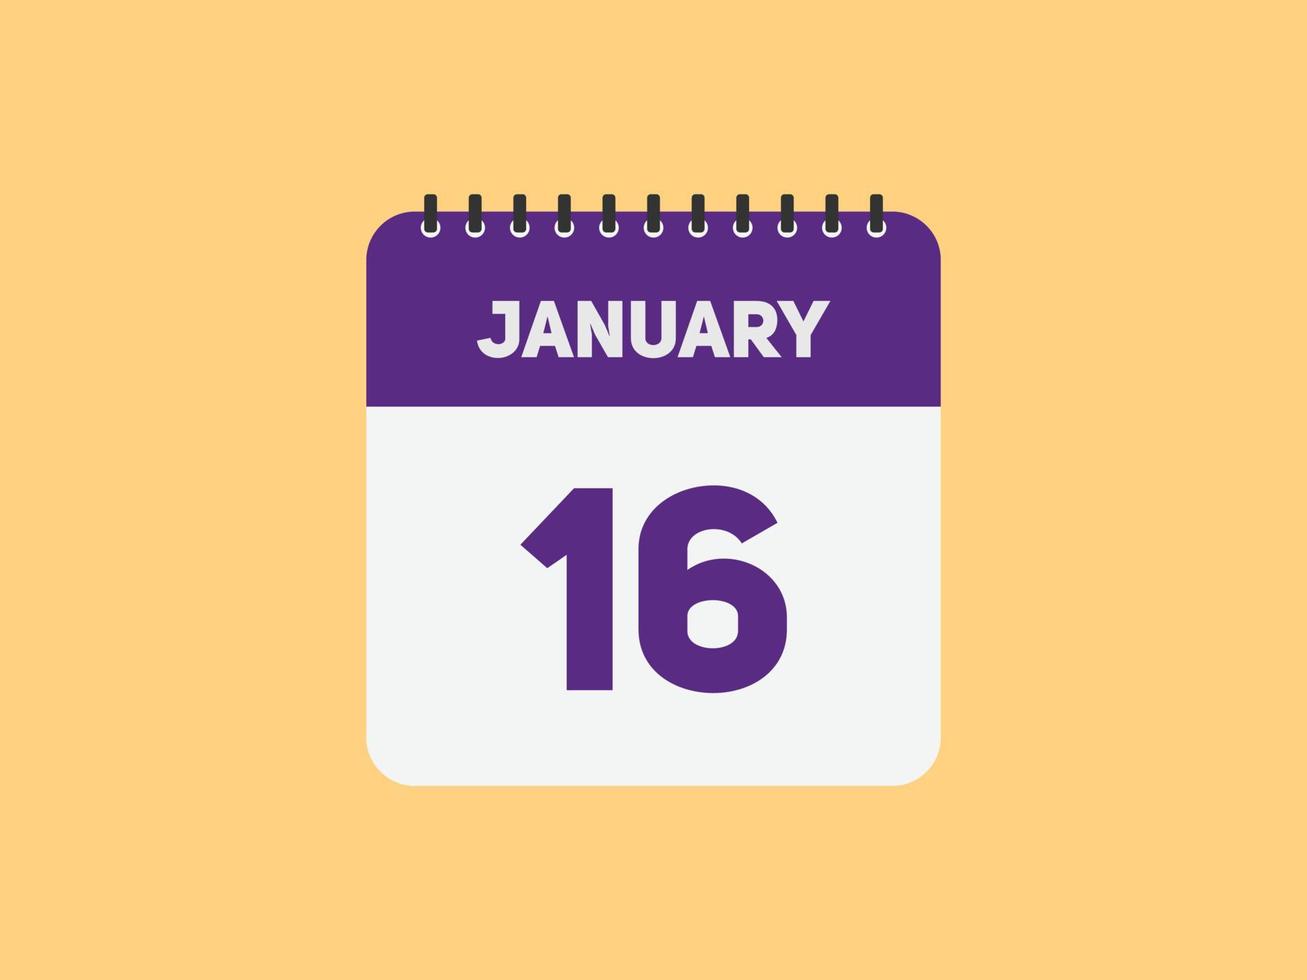 january 16 calendar reminder. 16th january daily calendar icon template. Calendar 16th january icon Design template. Vector illustration